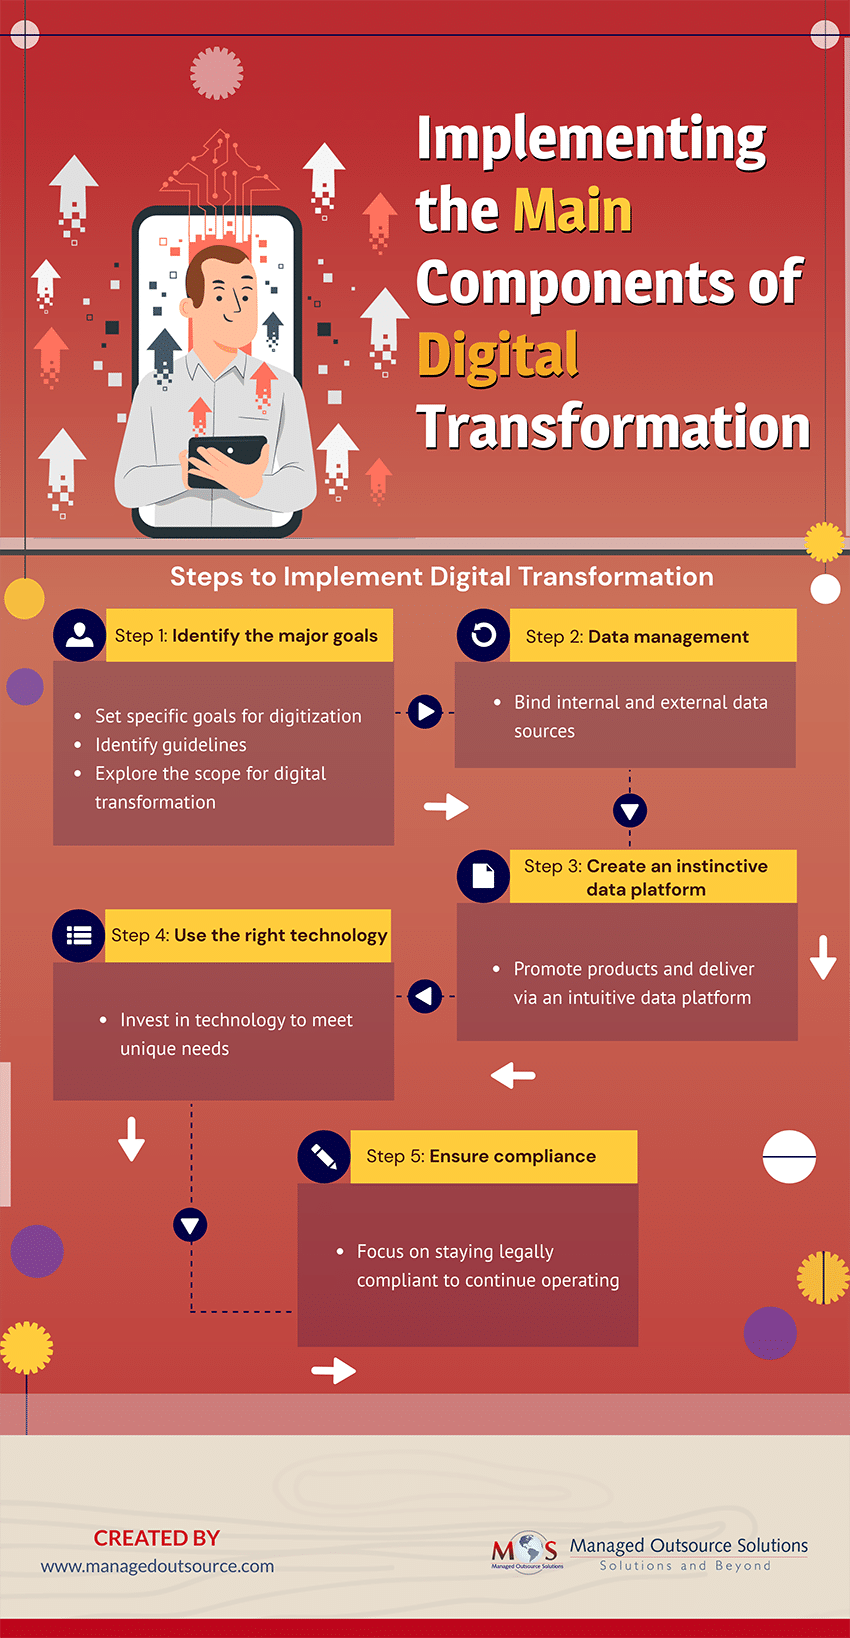 Implementing the Main Components of Digital Transformation